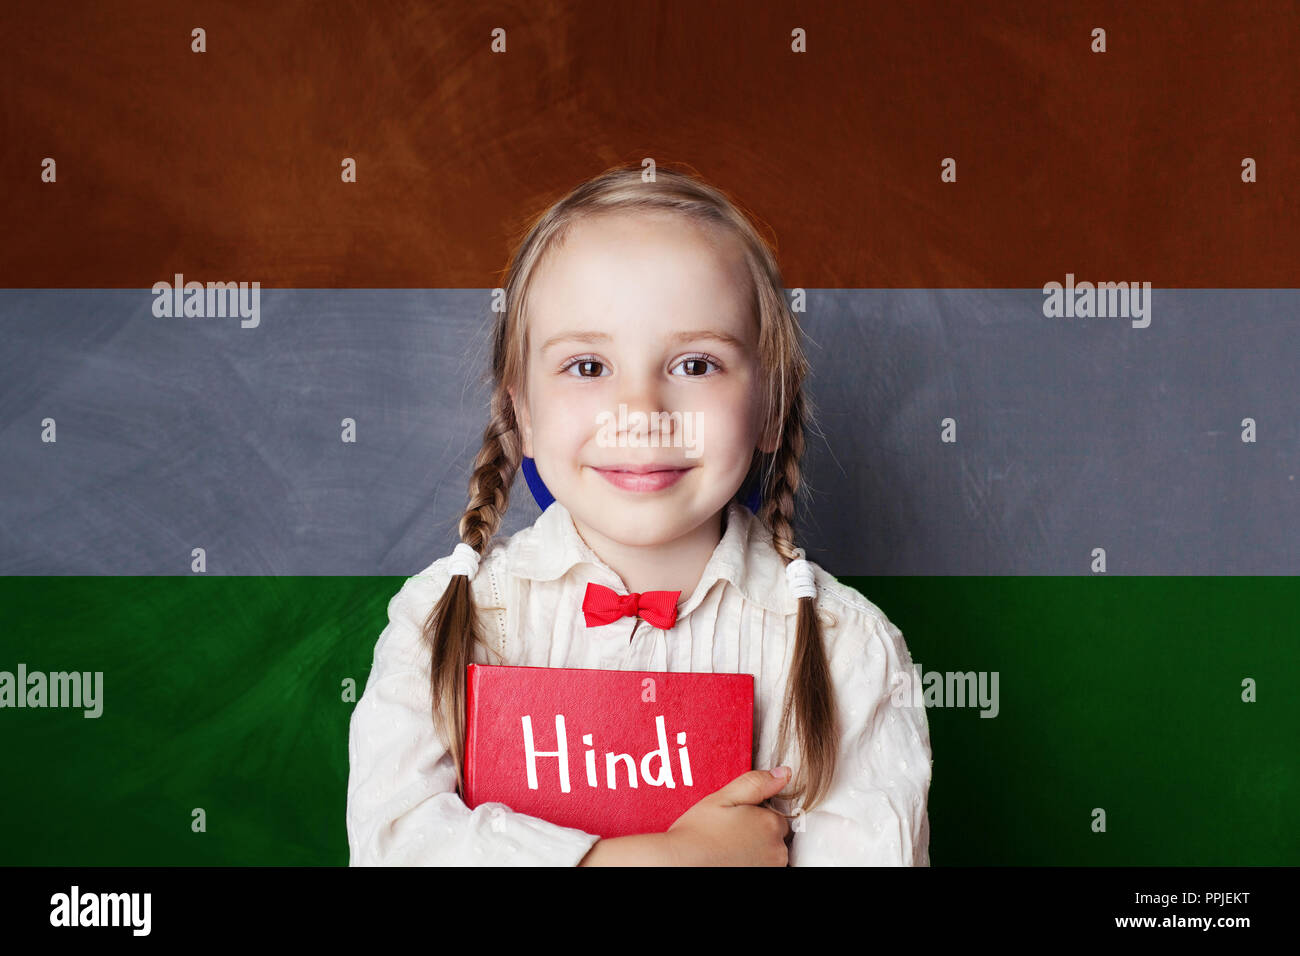 Hindi concept with little girl student against the India flag background. Learn hindi language Stock Photo